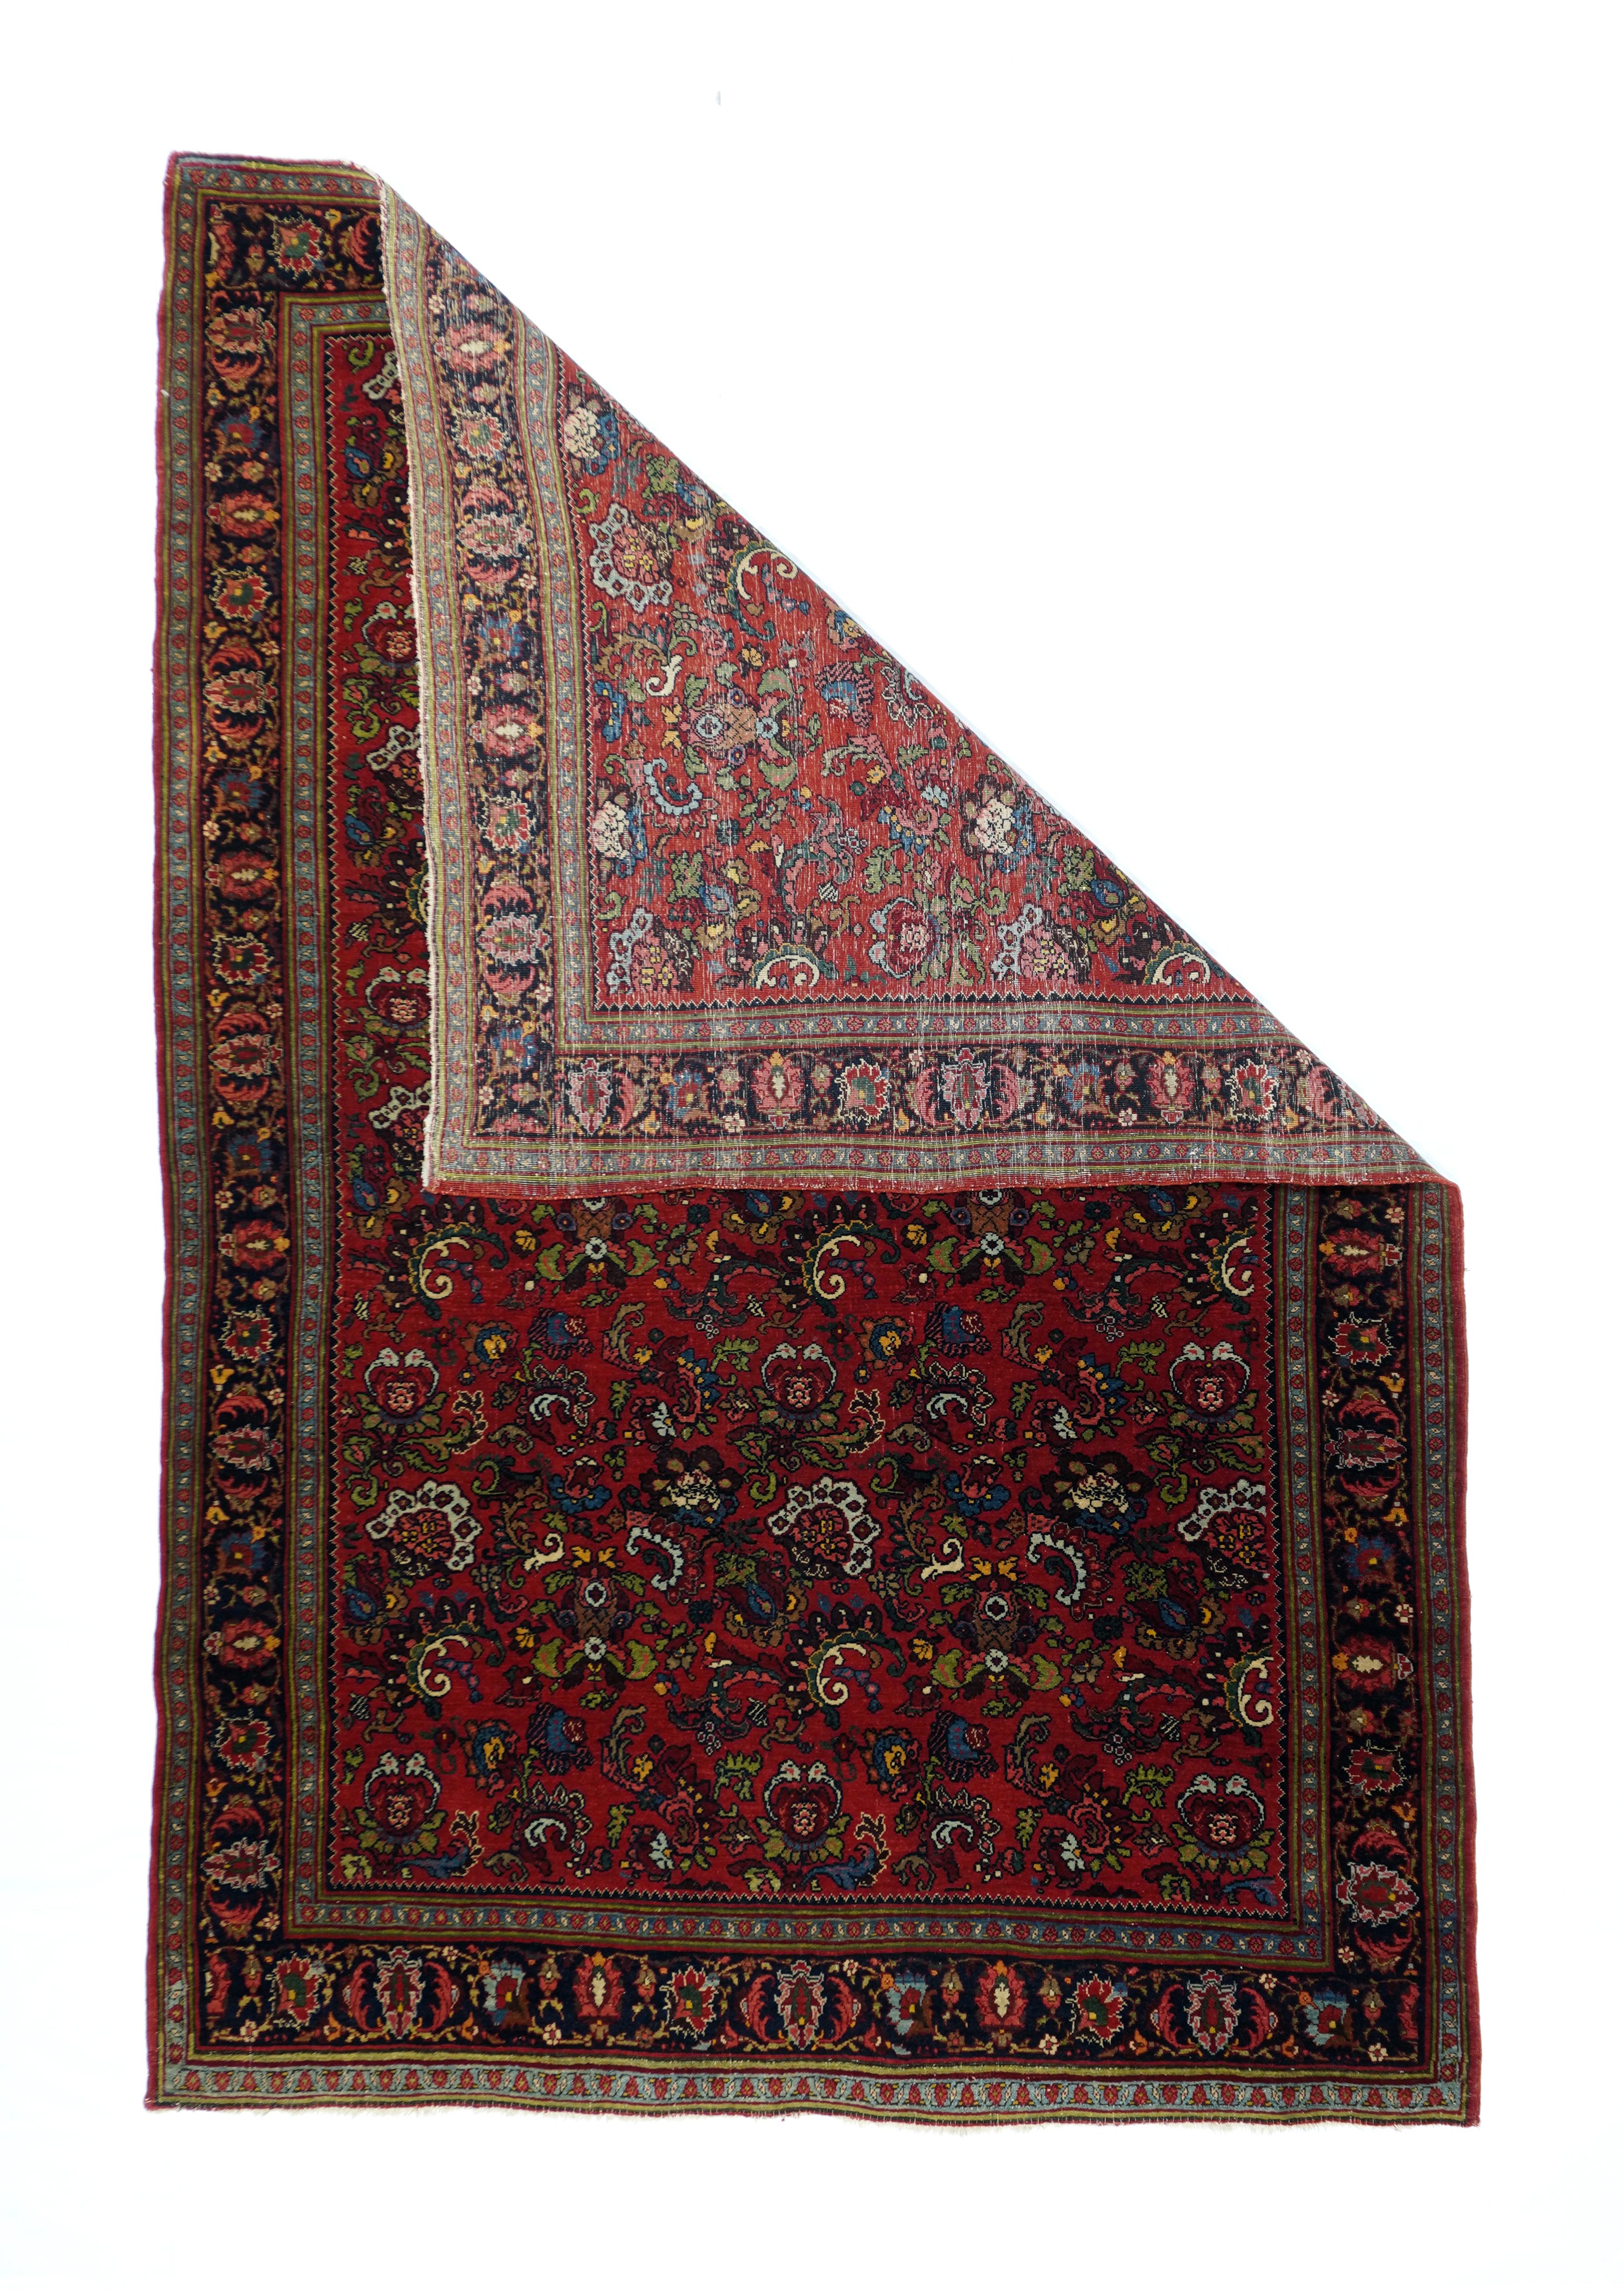 This virtually indestructible, board-like Kurdish city scatter from NW Persia, shows a saturated tomato red field with a close, allover textile pattern of elaborately curved leaves, layered exploding palmettes and imaginative small Rococo vegetal